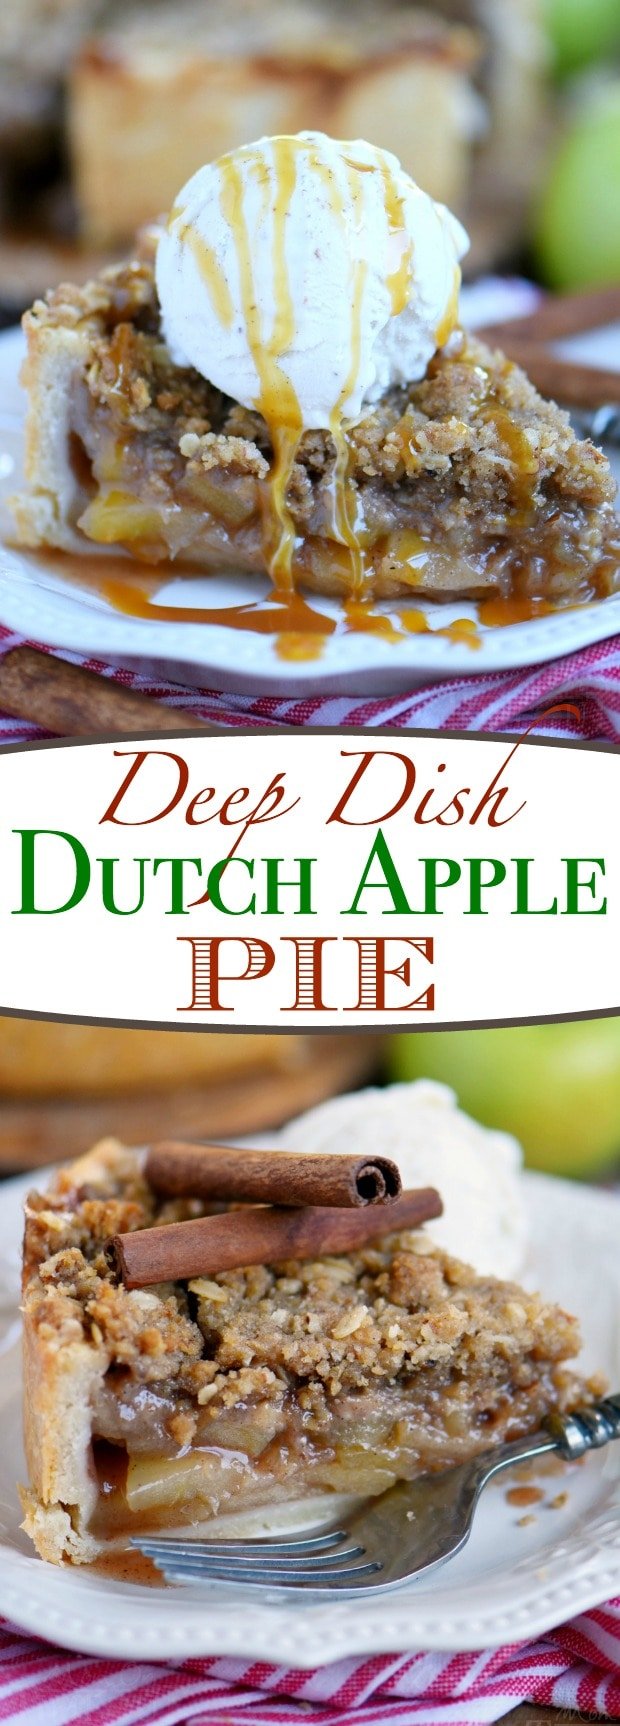 Deep Dish Dutch Apple Pie is loaded with a spiced apple filling and topped with a crunchy, sweet, pecan streusel topping. Best served with a big scoop of vanilla ice cream and caramel sauce. This is THE dessert for the fall season! | Mom On Timeout